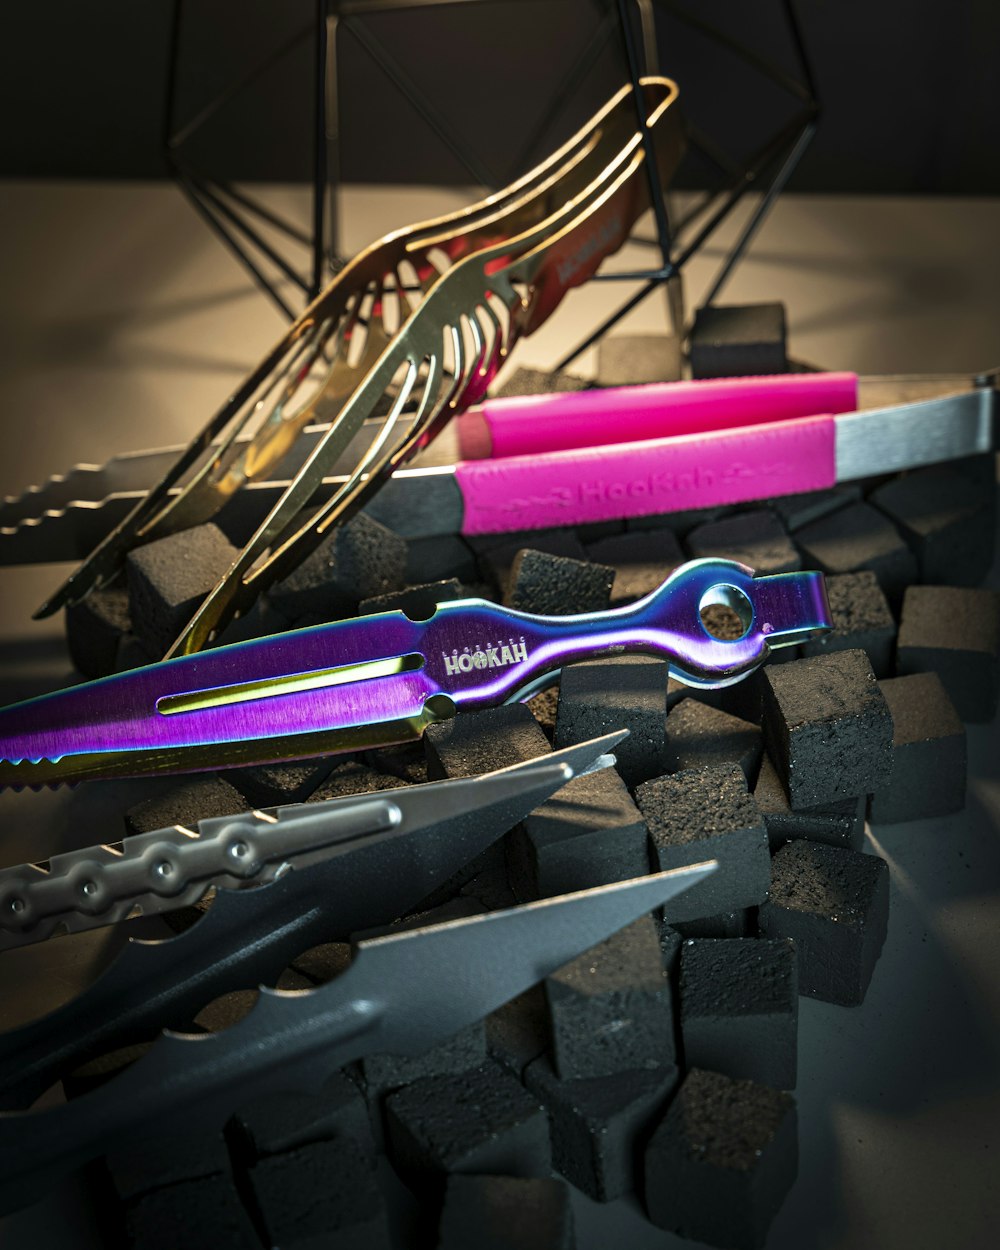 a group of scissors and combs